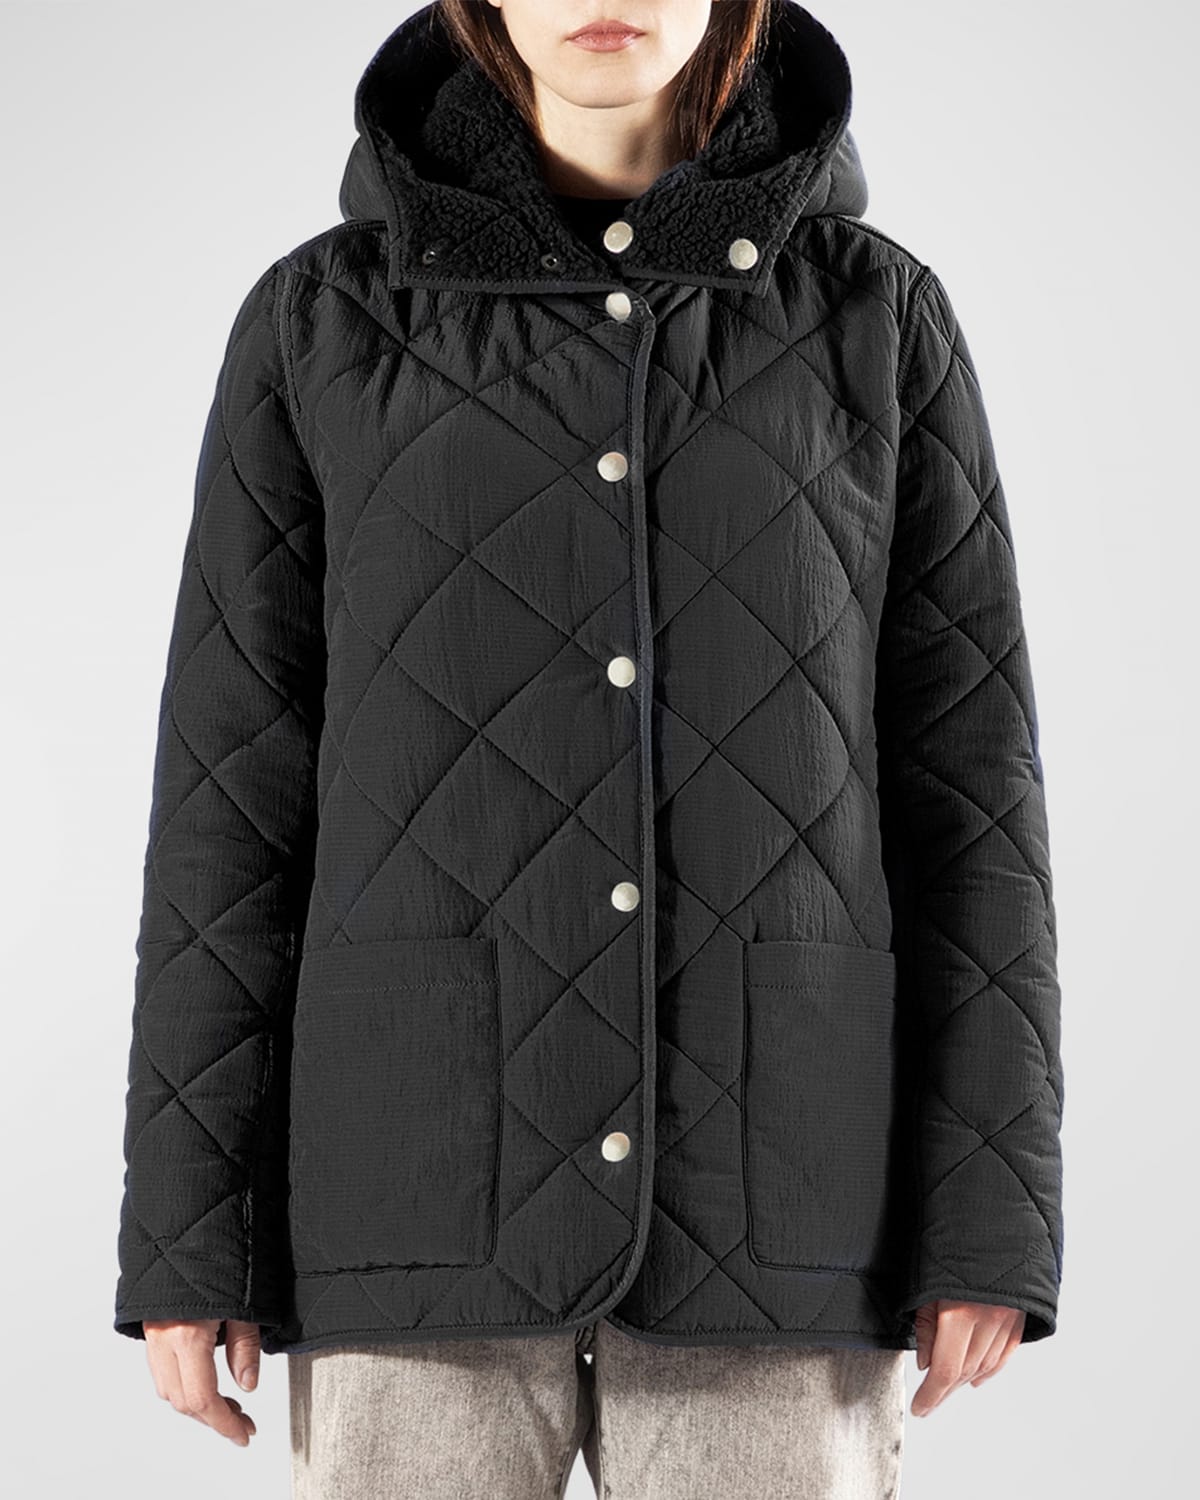 Jane Post Oversize Quilted Reversible Teddy Jacket